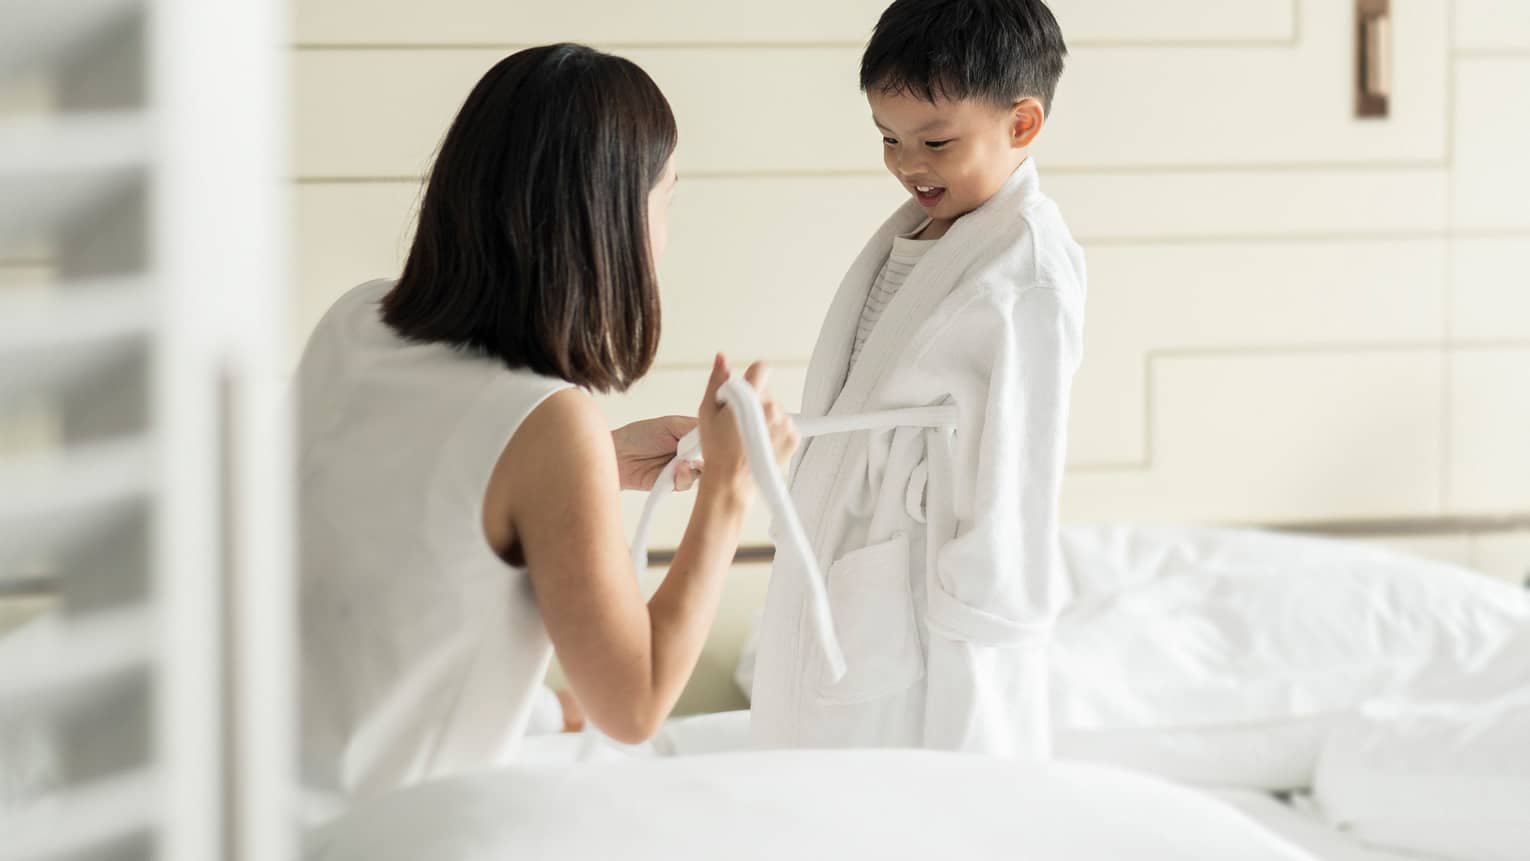 Woman kneels in front of young child, ties front of his white bathrobe